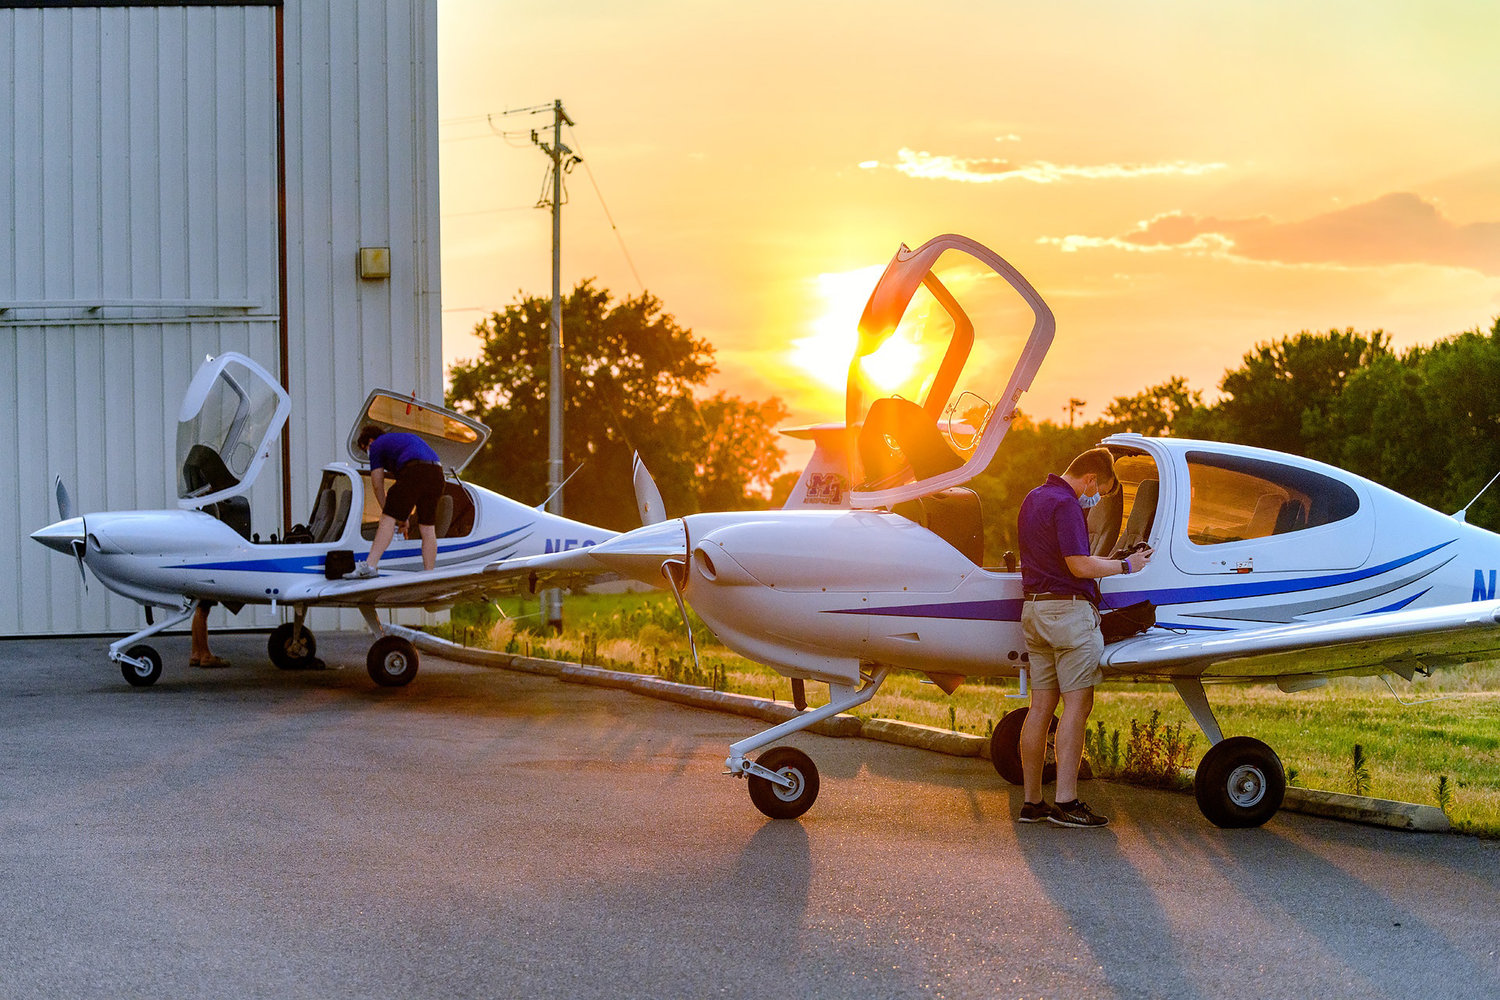 In the summer 2020 file photo, MTSU Aerospace students and certified flight instructors Ryan Patterson, front, and Cole Ferraro and Copher Kashif prepare to fly the newest additions to the MTSU fleet of Diamond aircraft from the Canadian factory to the Murfreesboro Municipal Airport.